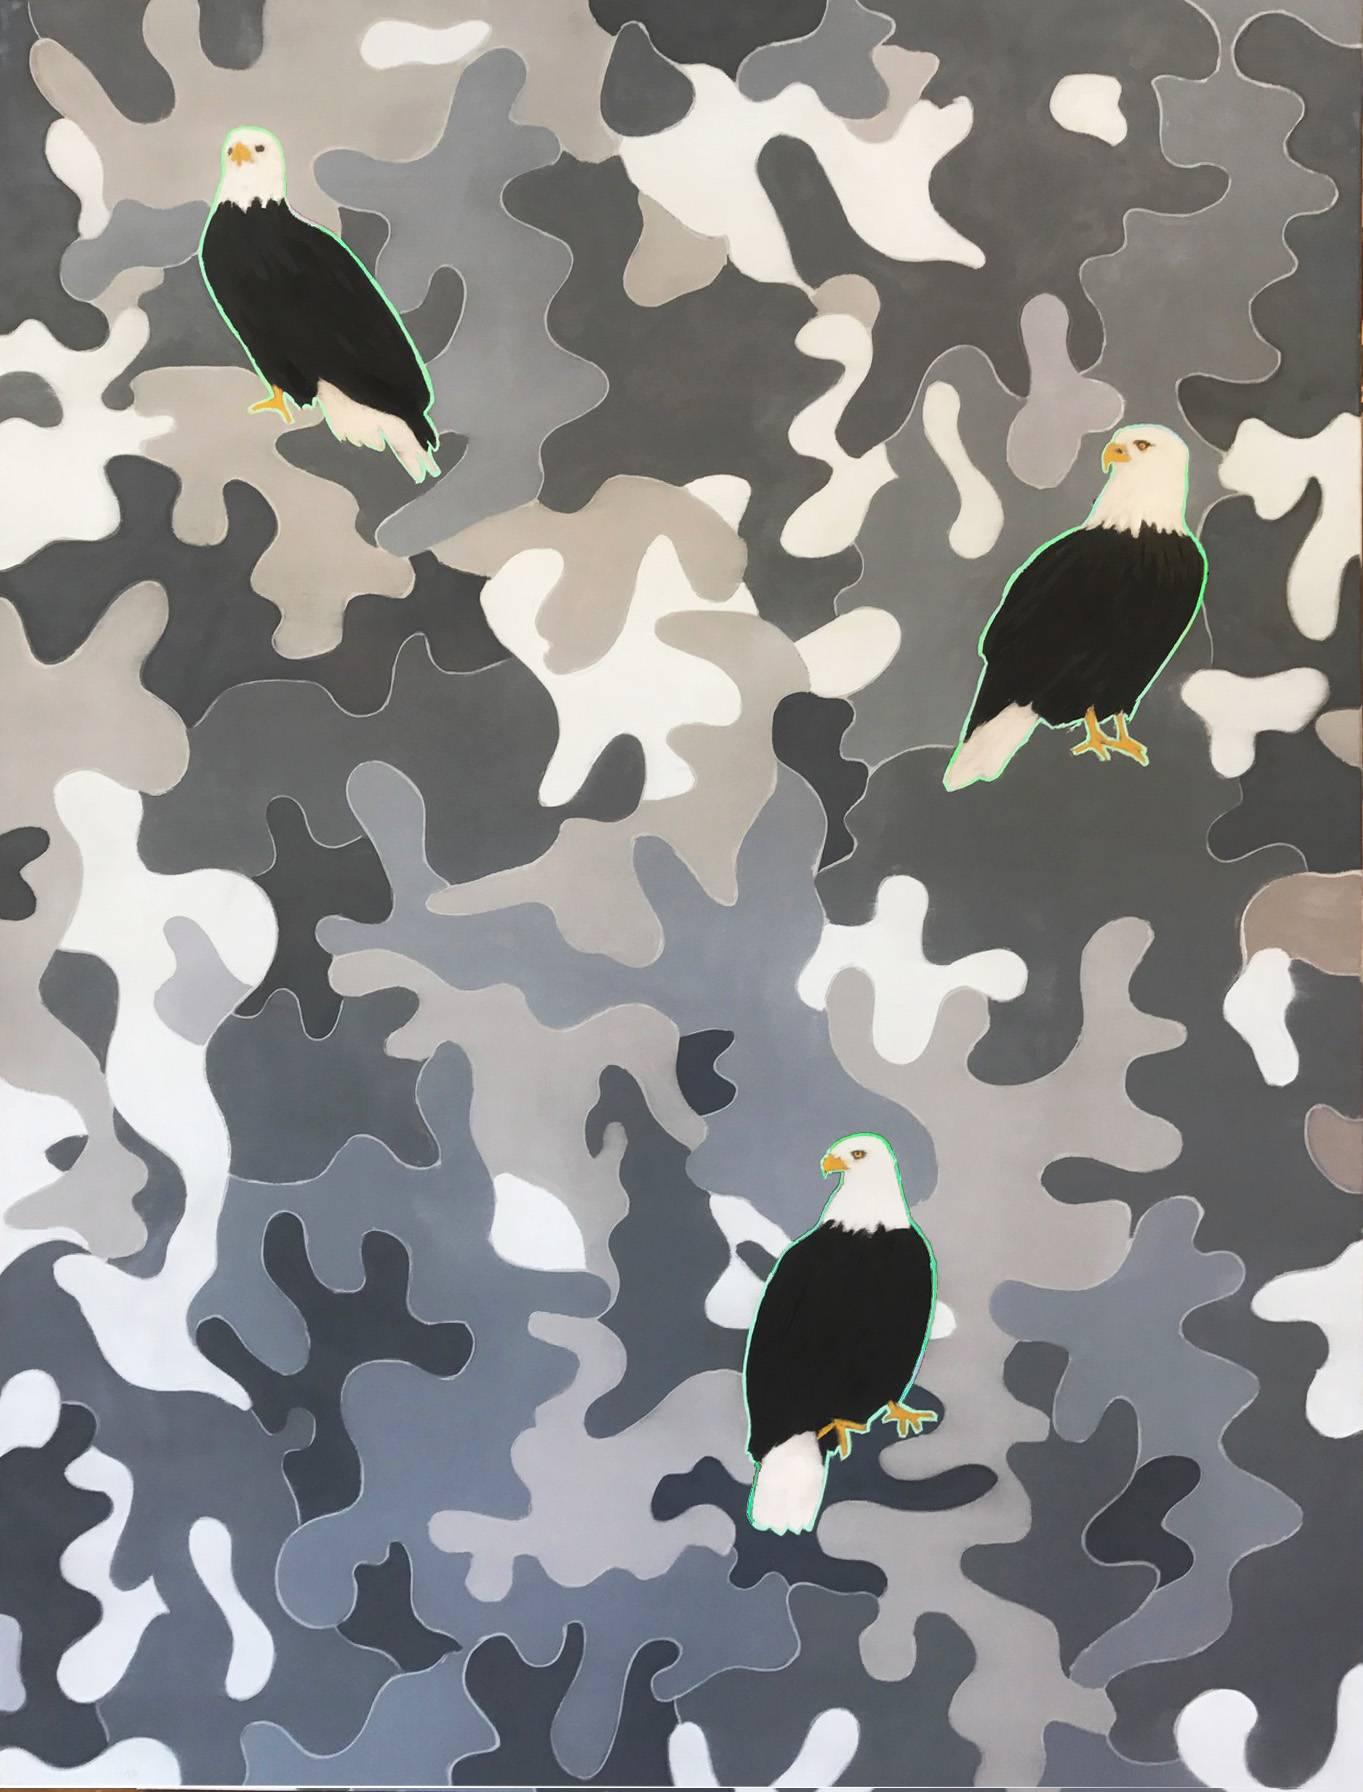 Mike Piggott Animal Painting - Eagles and Camoflage